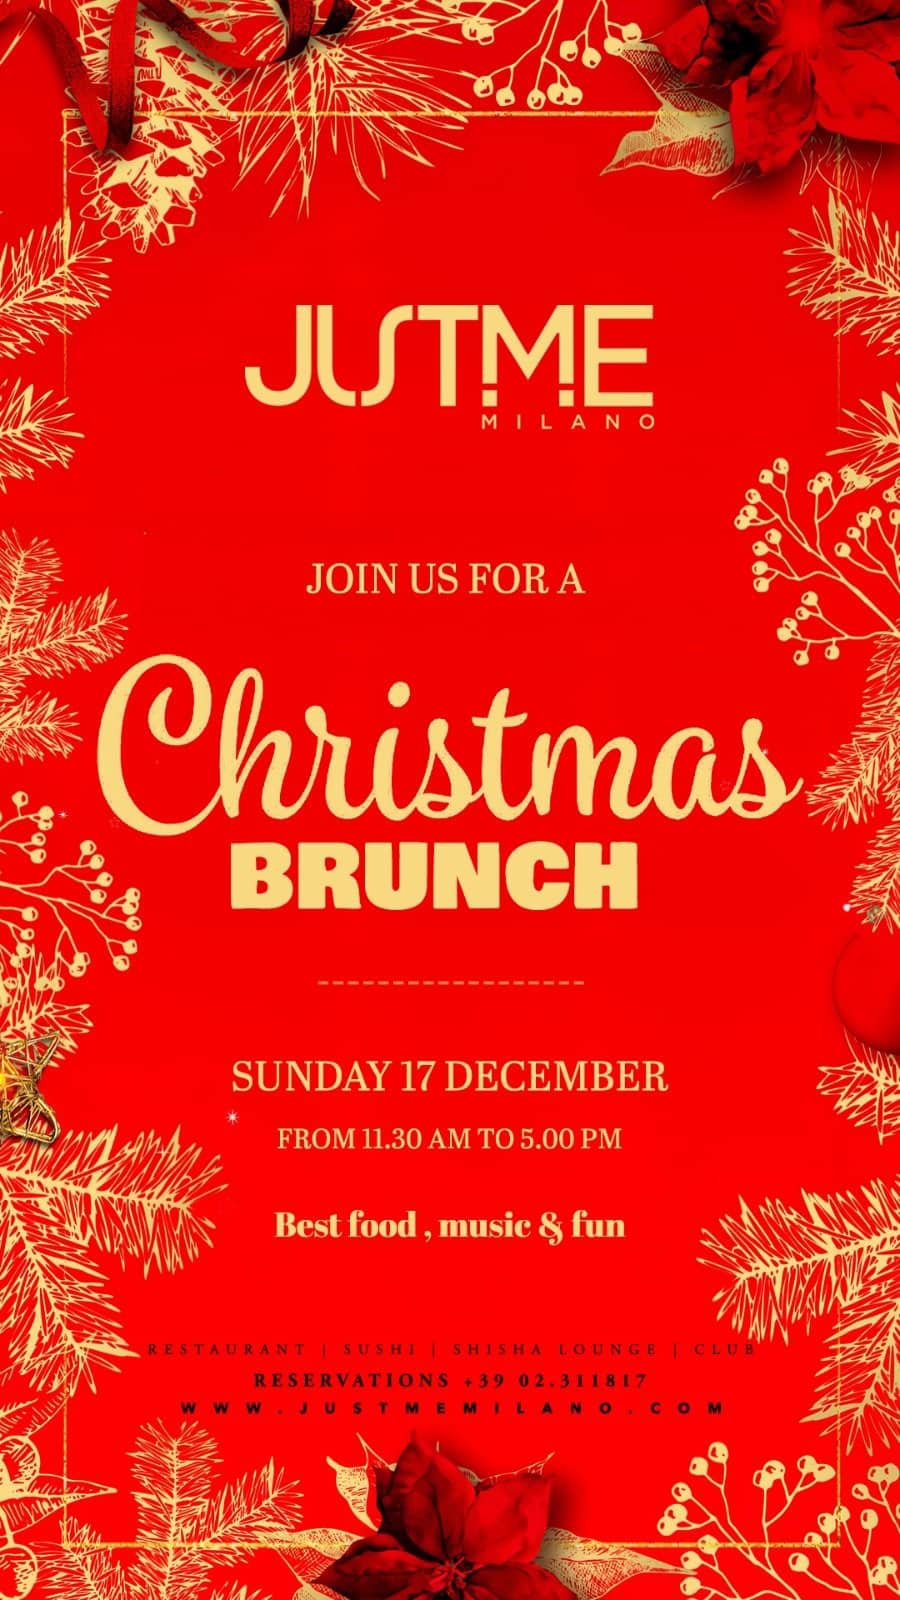 christmas brunch justme 17 dicembre